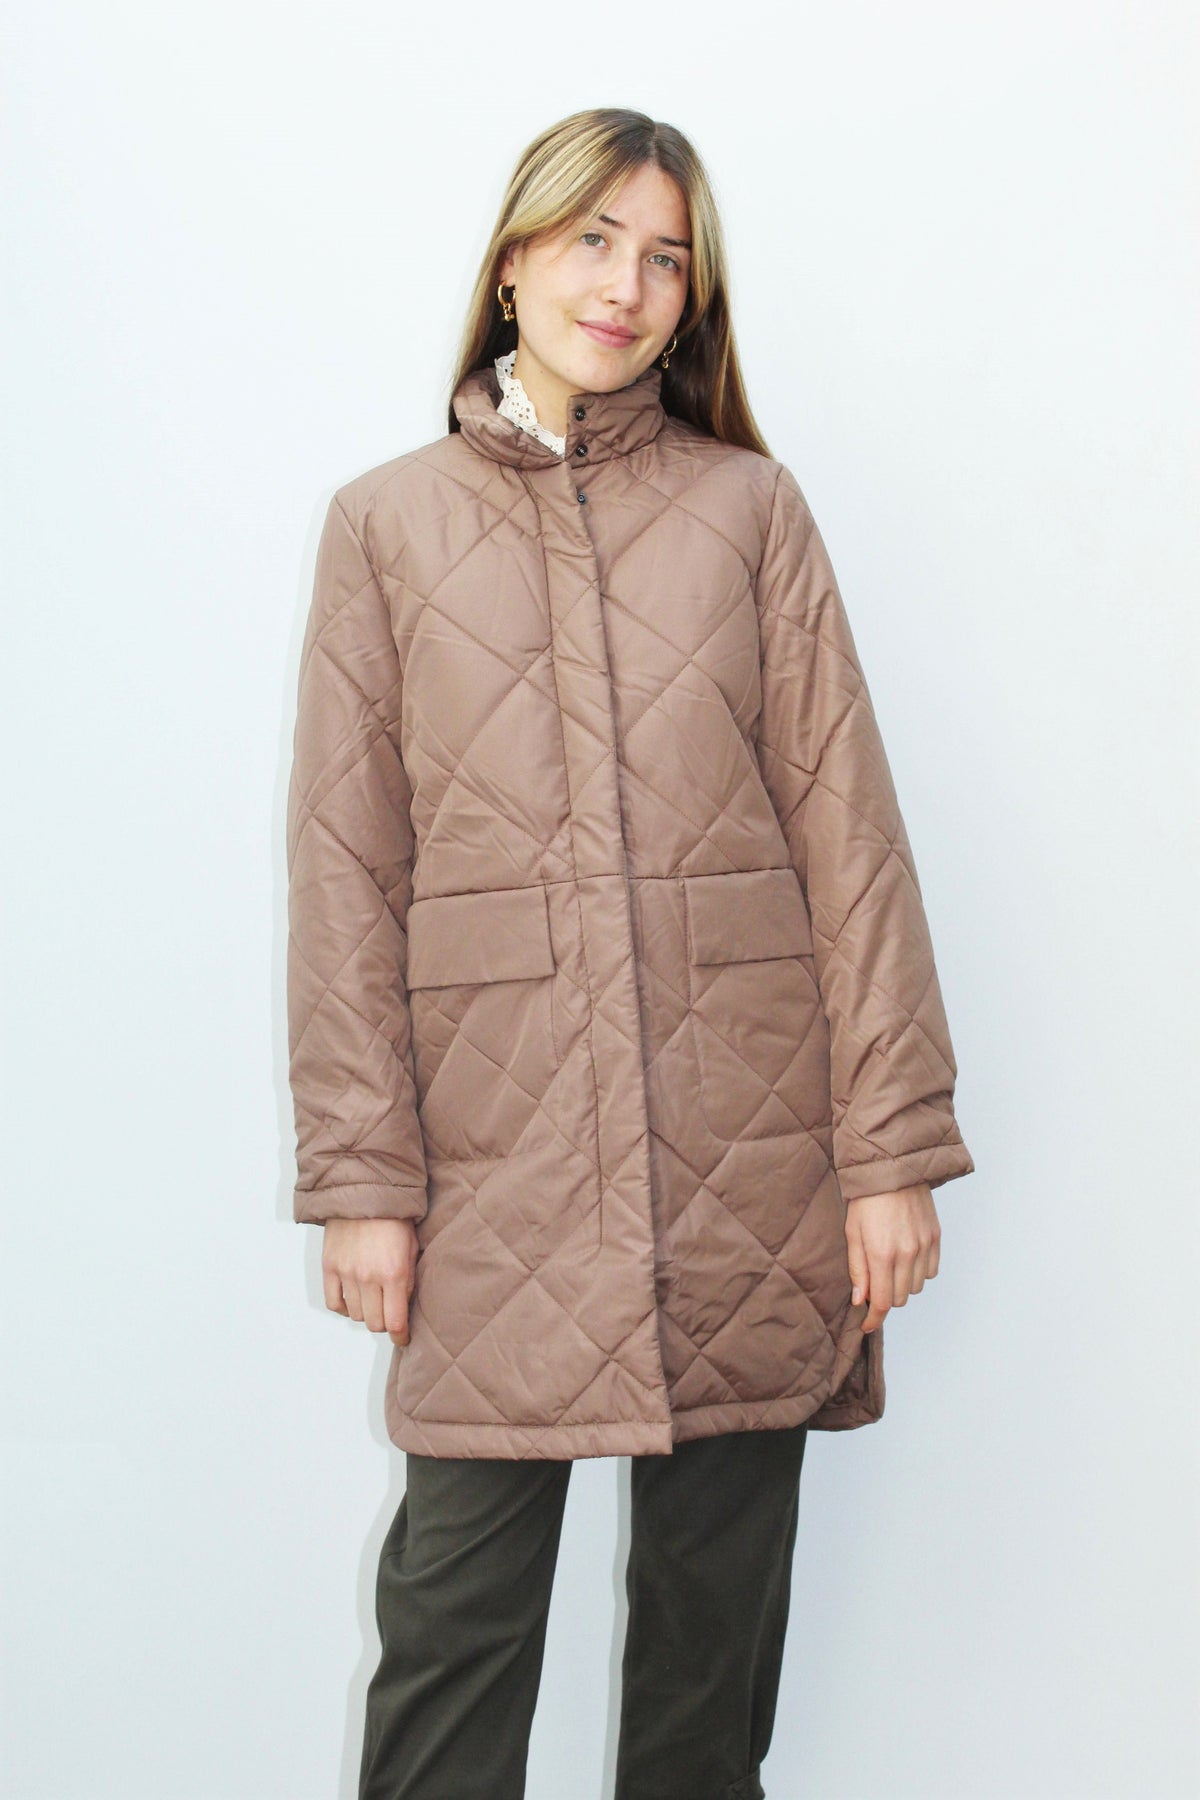 SLF Naddy Quilted Coat in Caribou